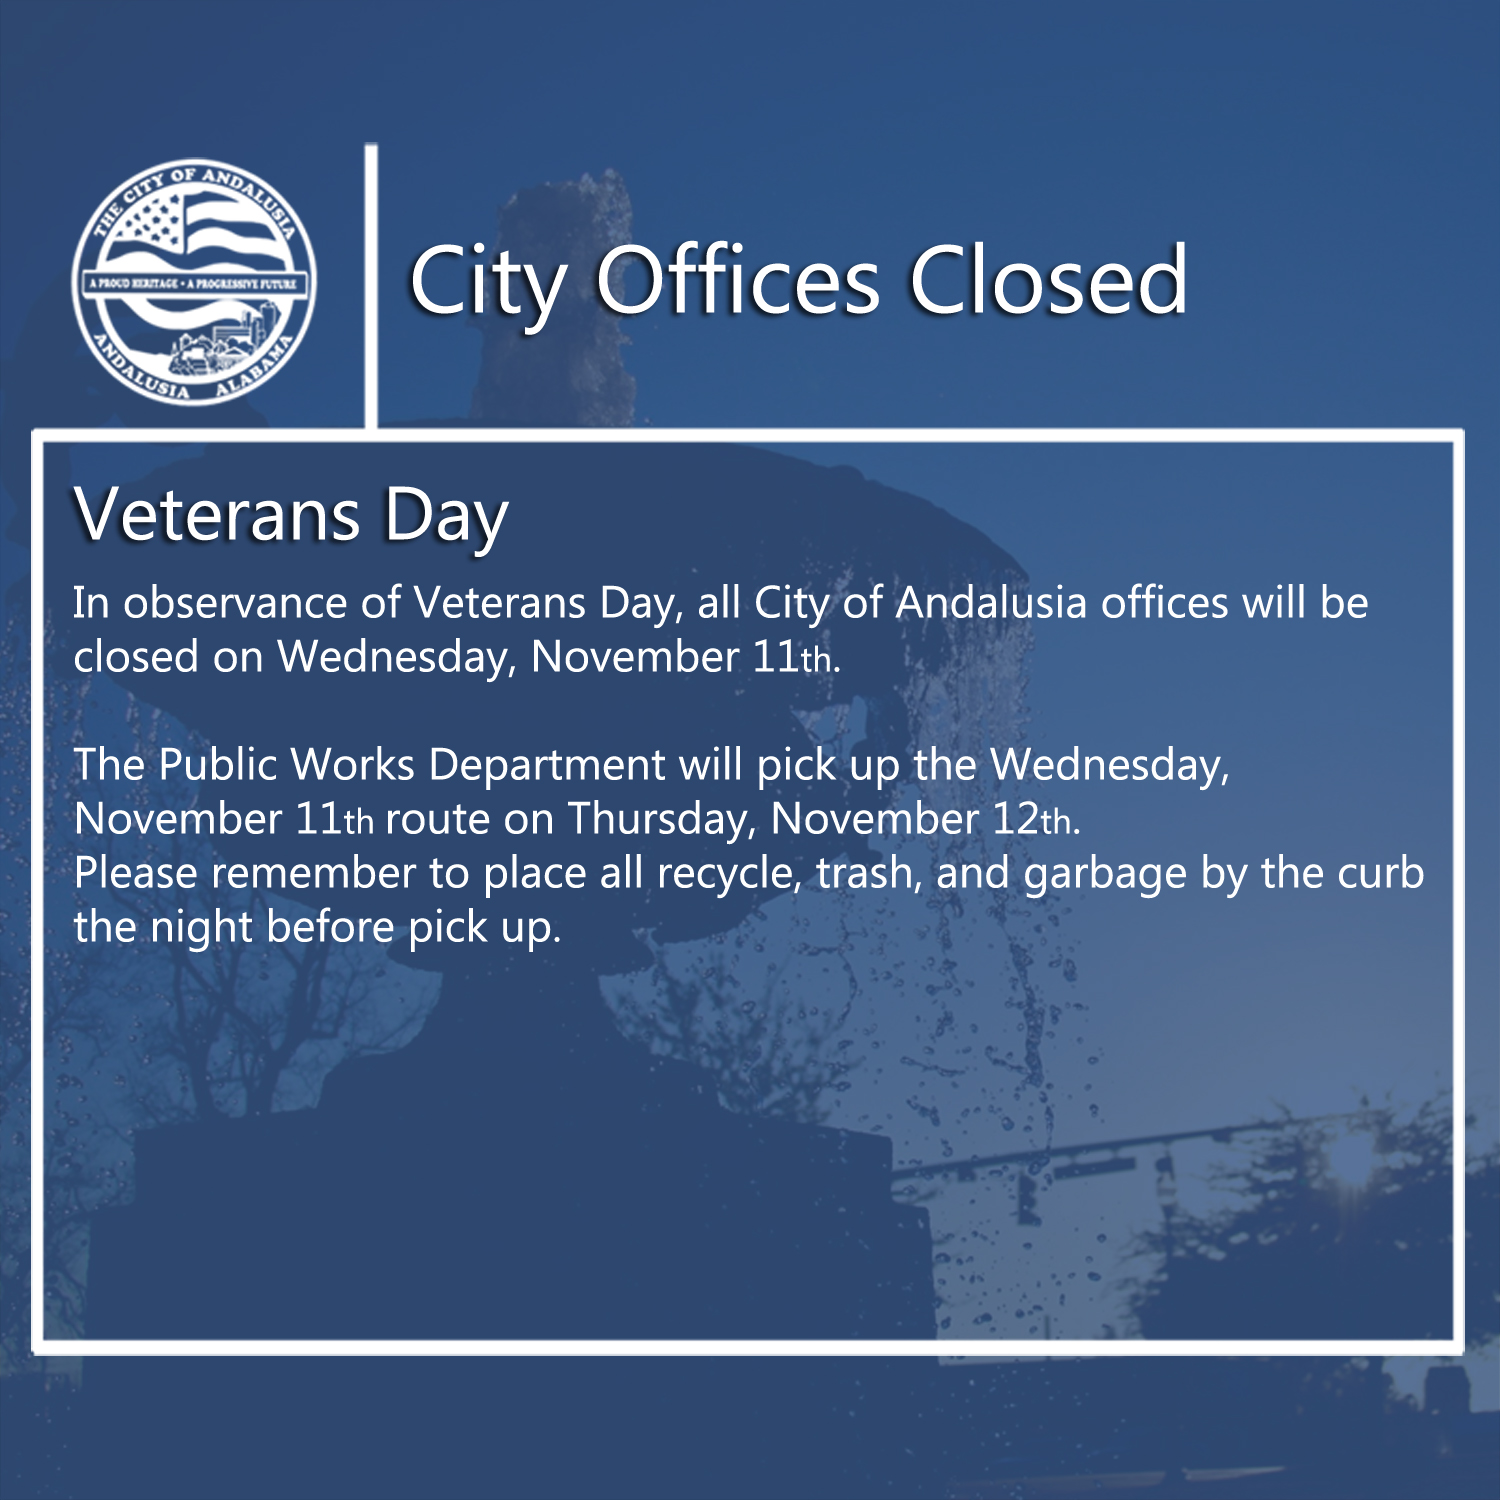 Facebook City Offices Closed Nov 11th